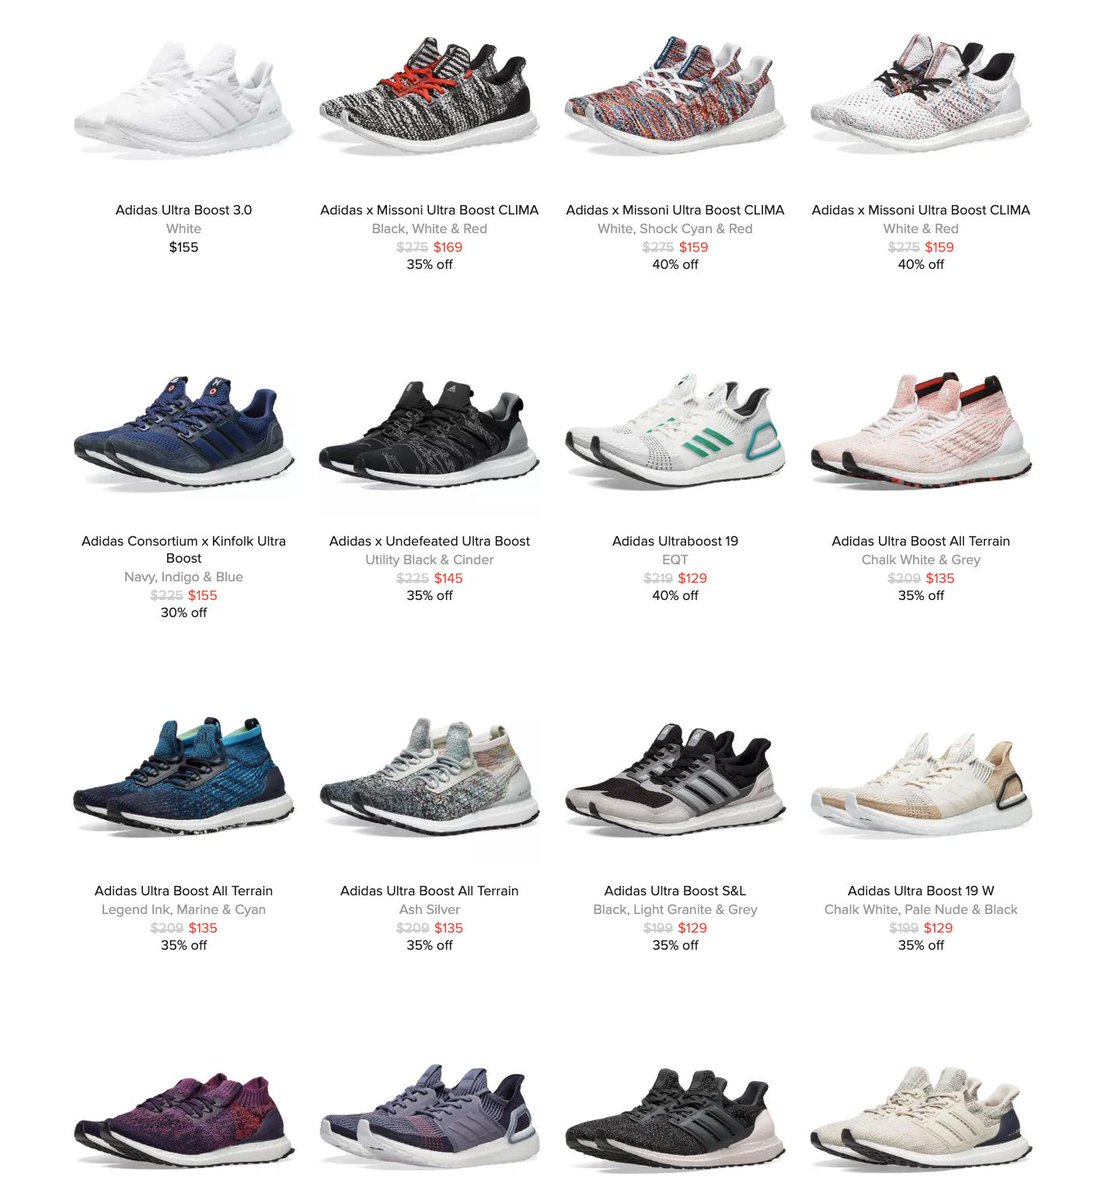 off via End adidas Ultra Boost styles 